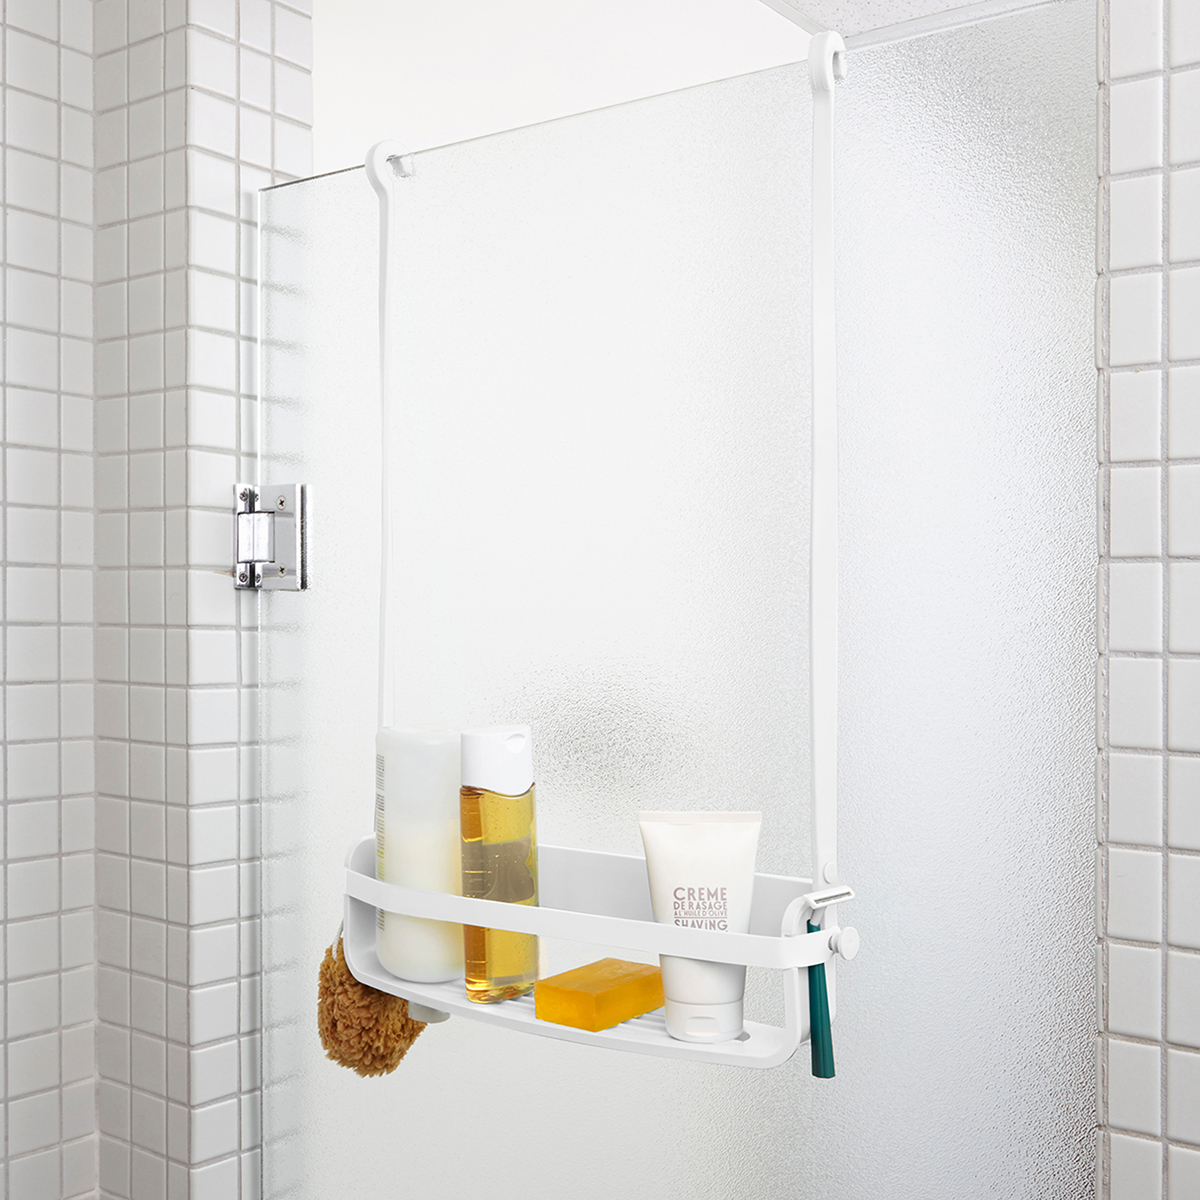 https://www.containerstore.com/catalogimages/412571/10073936-Umbra-Shower-Caddy-VEN5.jpg